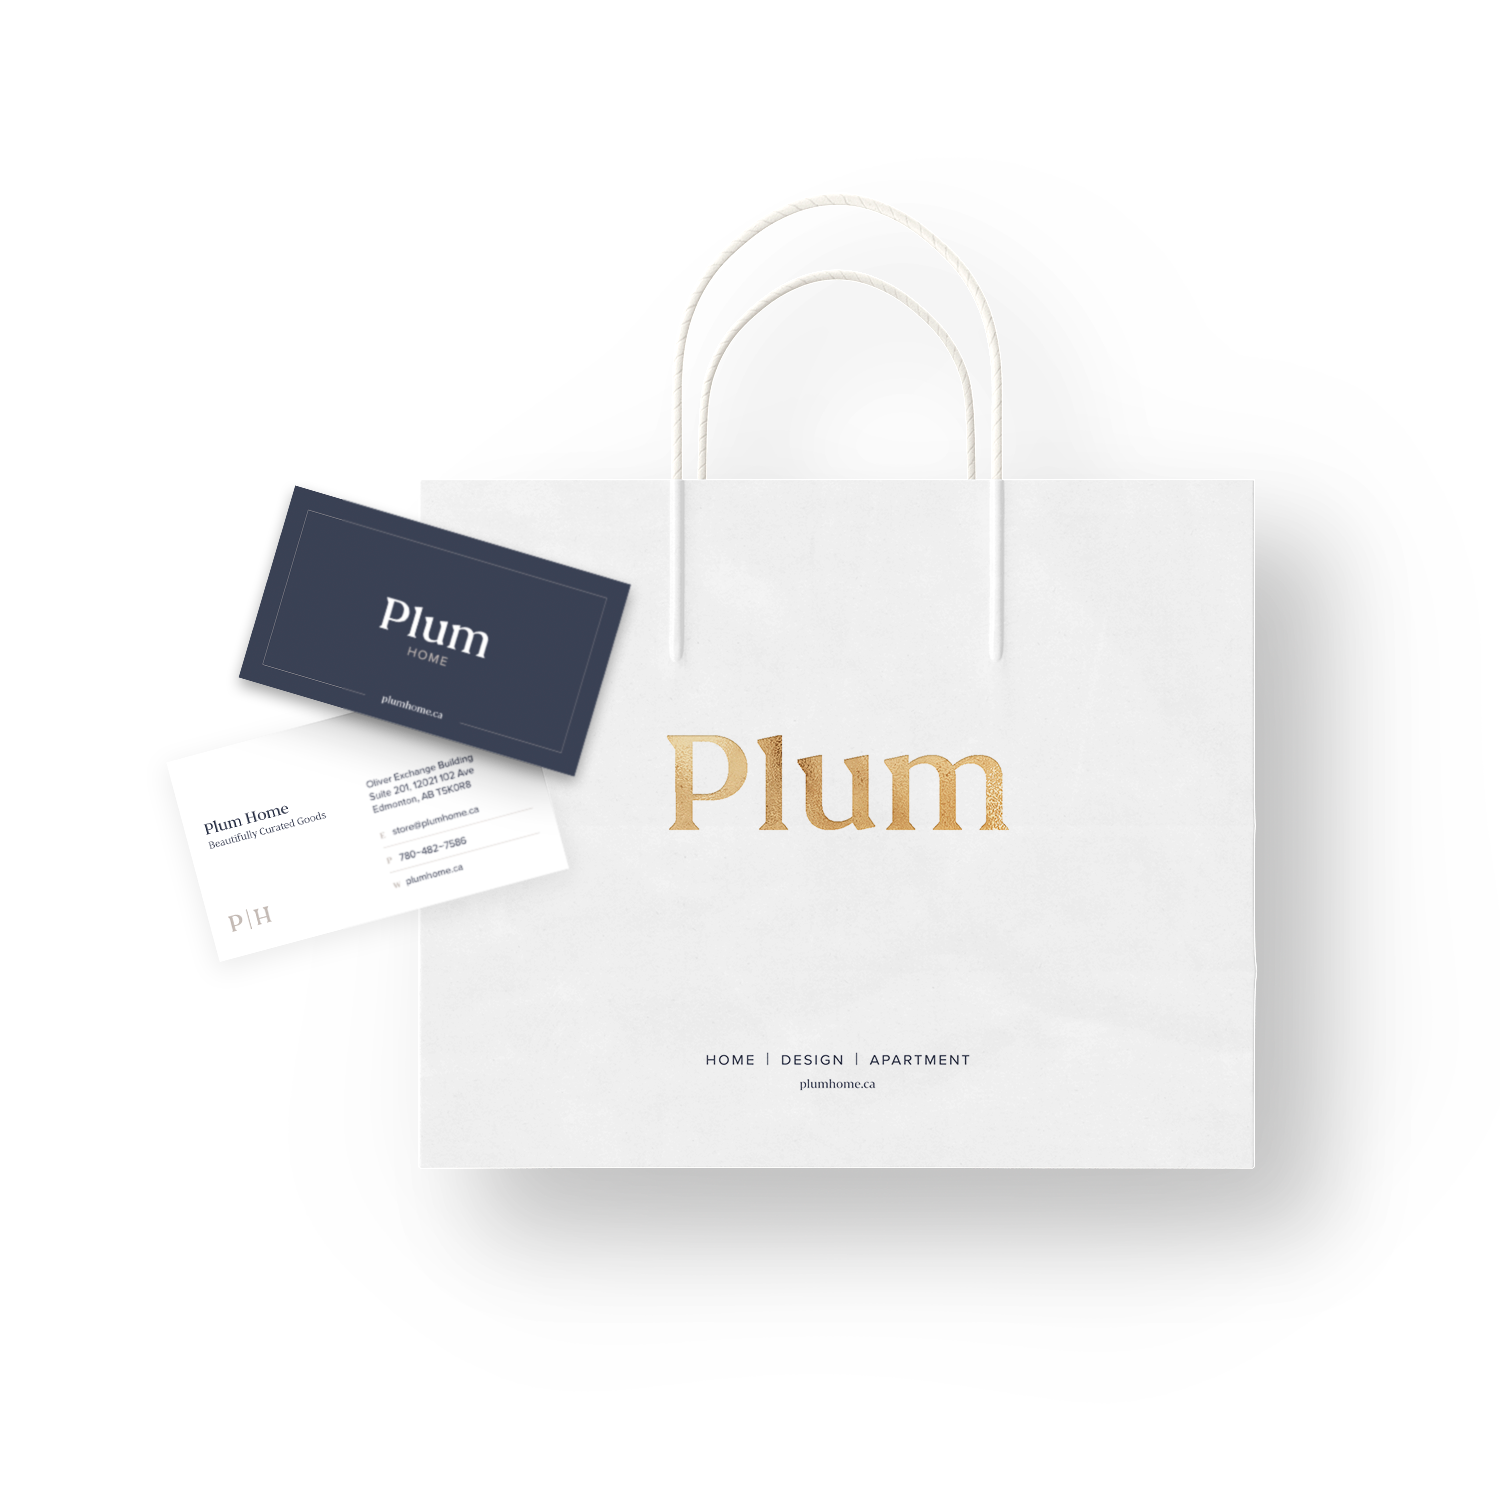 Plum bag design and business cards Project image 2